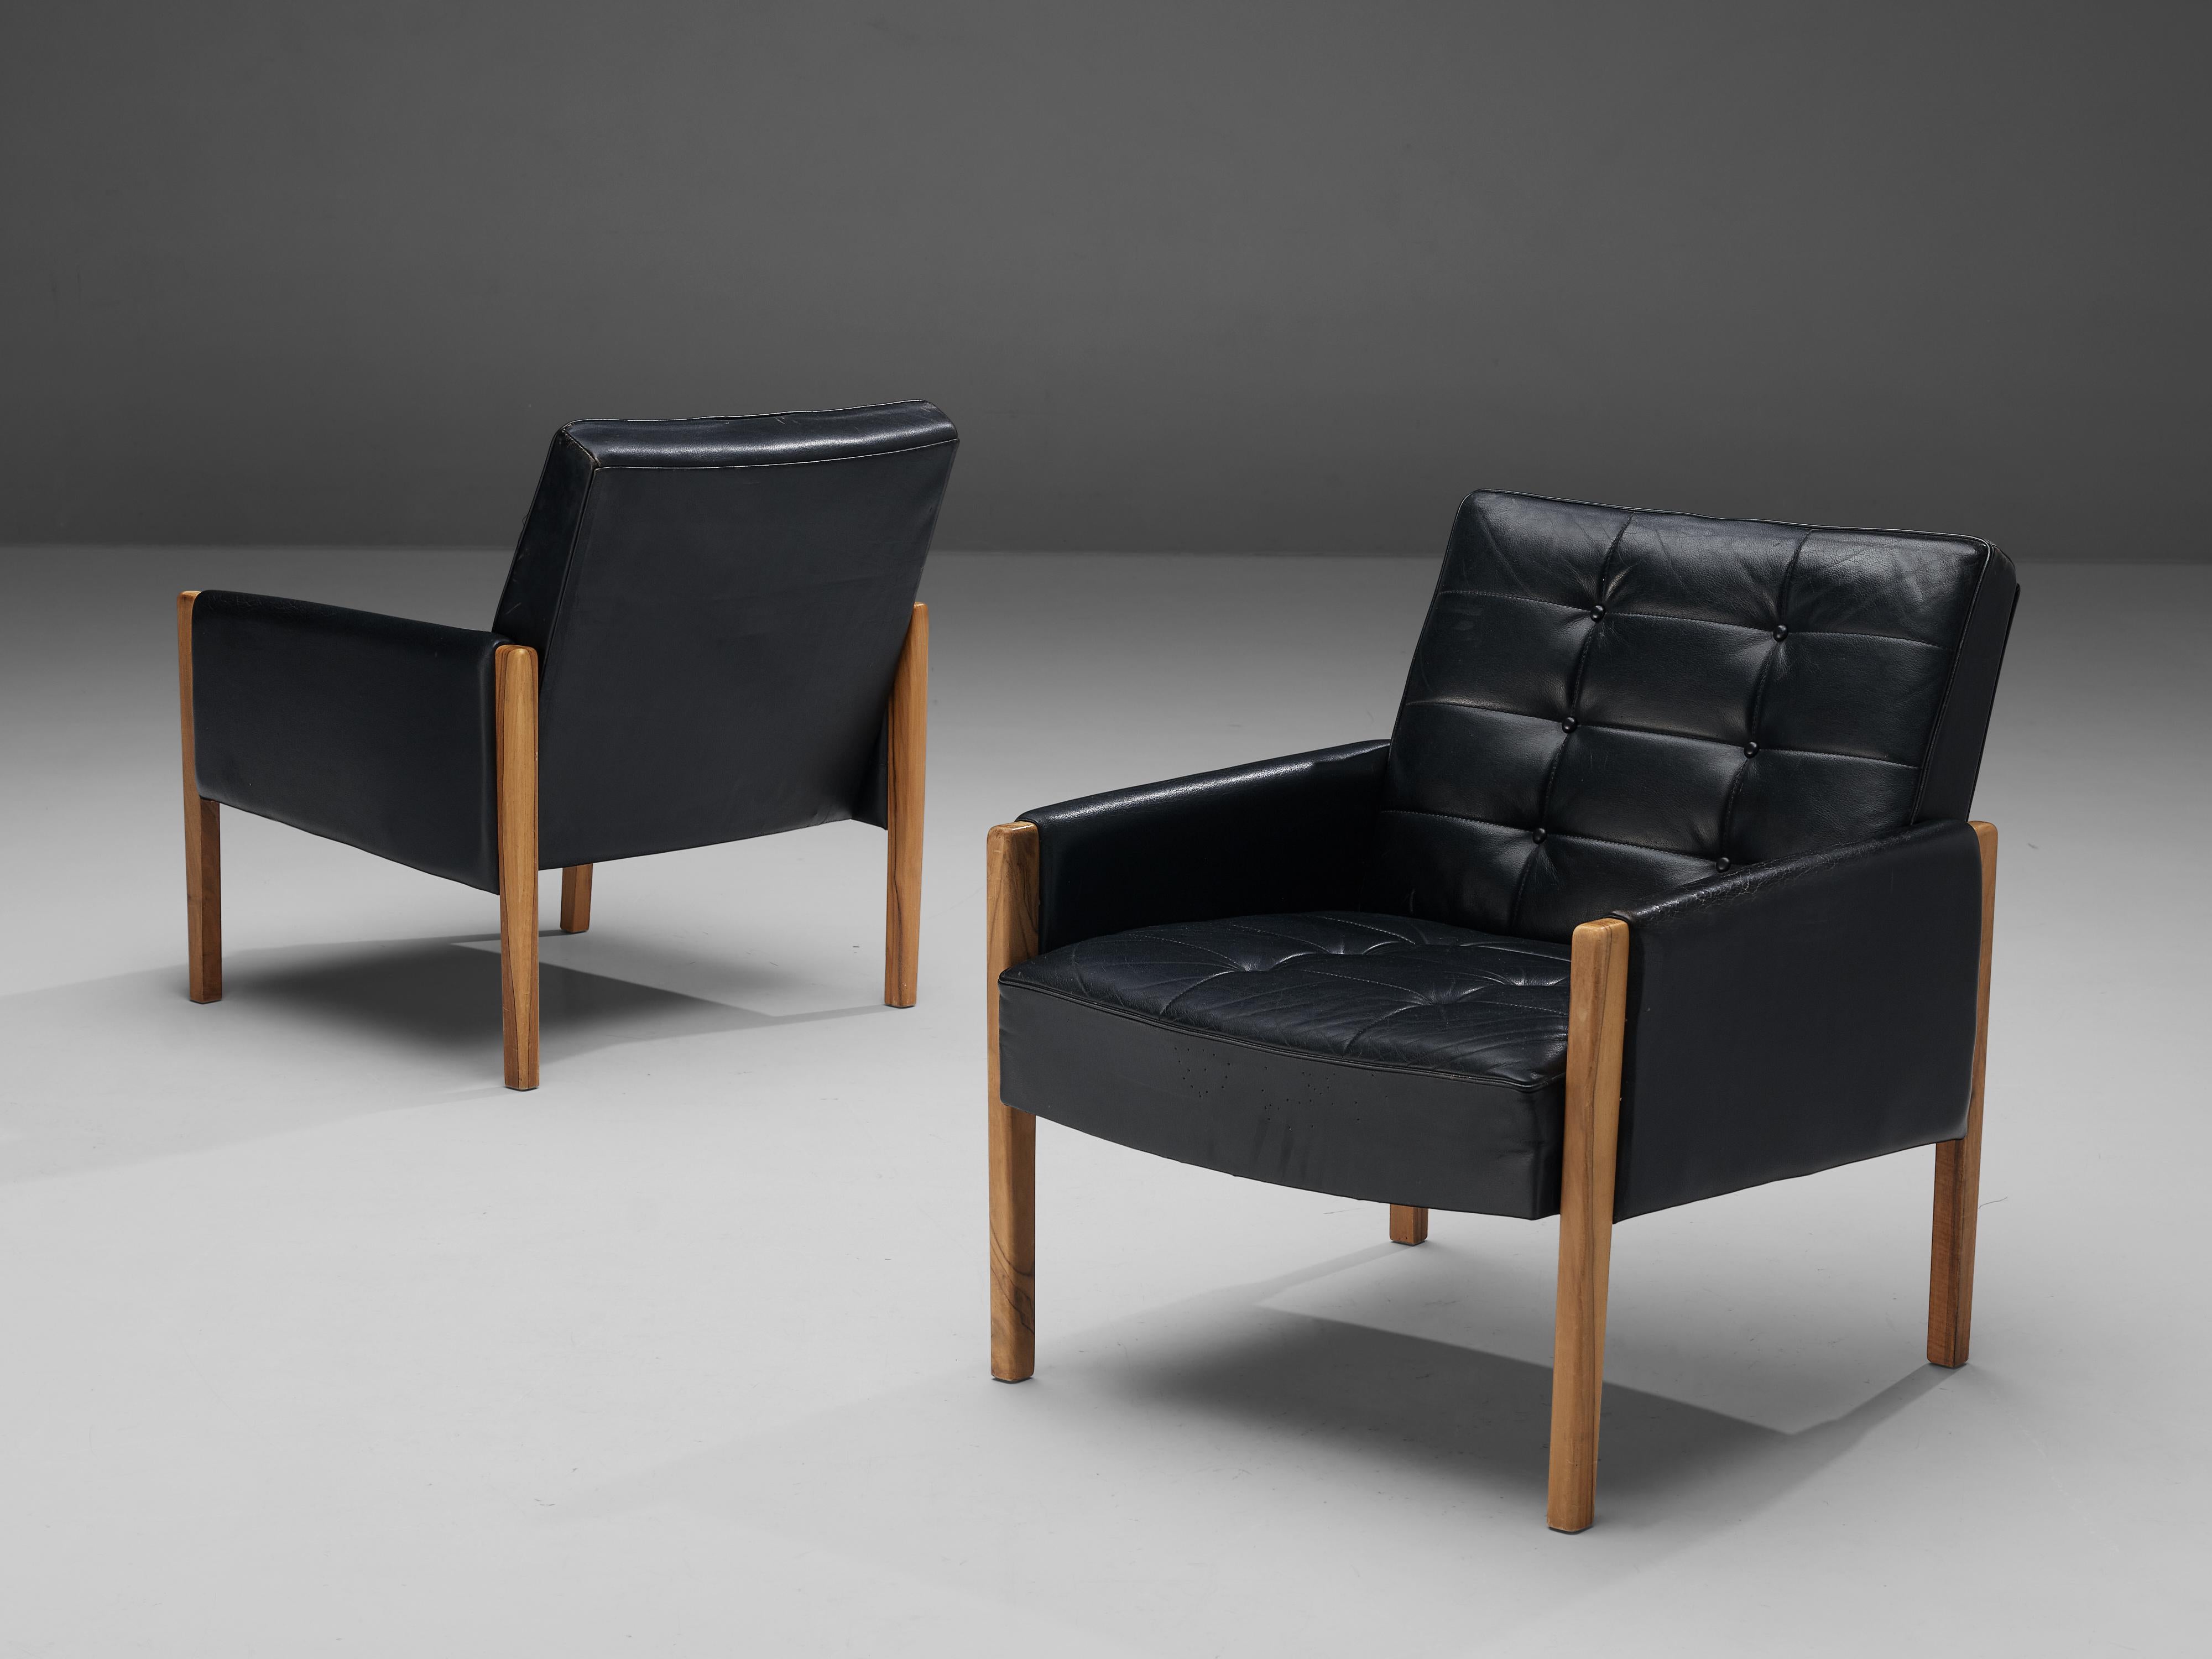 Pair of lounge chairs, leather, walnut, Italy, 1960s

Grand lounge chair in black leather and stained walnut. This chair features a solid wooden base with a tufted leather seating placed on top of the wooden frame. The armrests are also upholstered